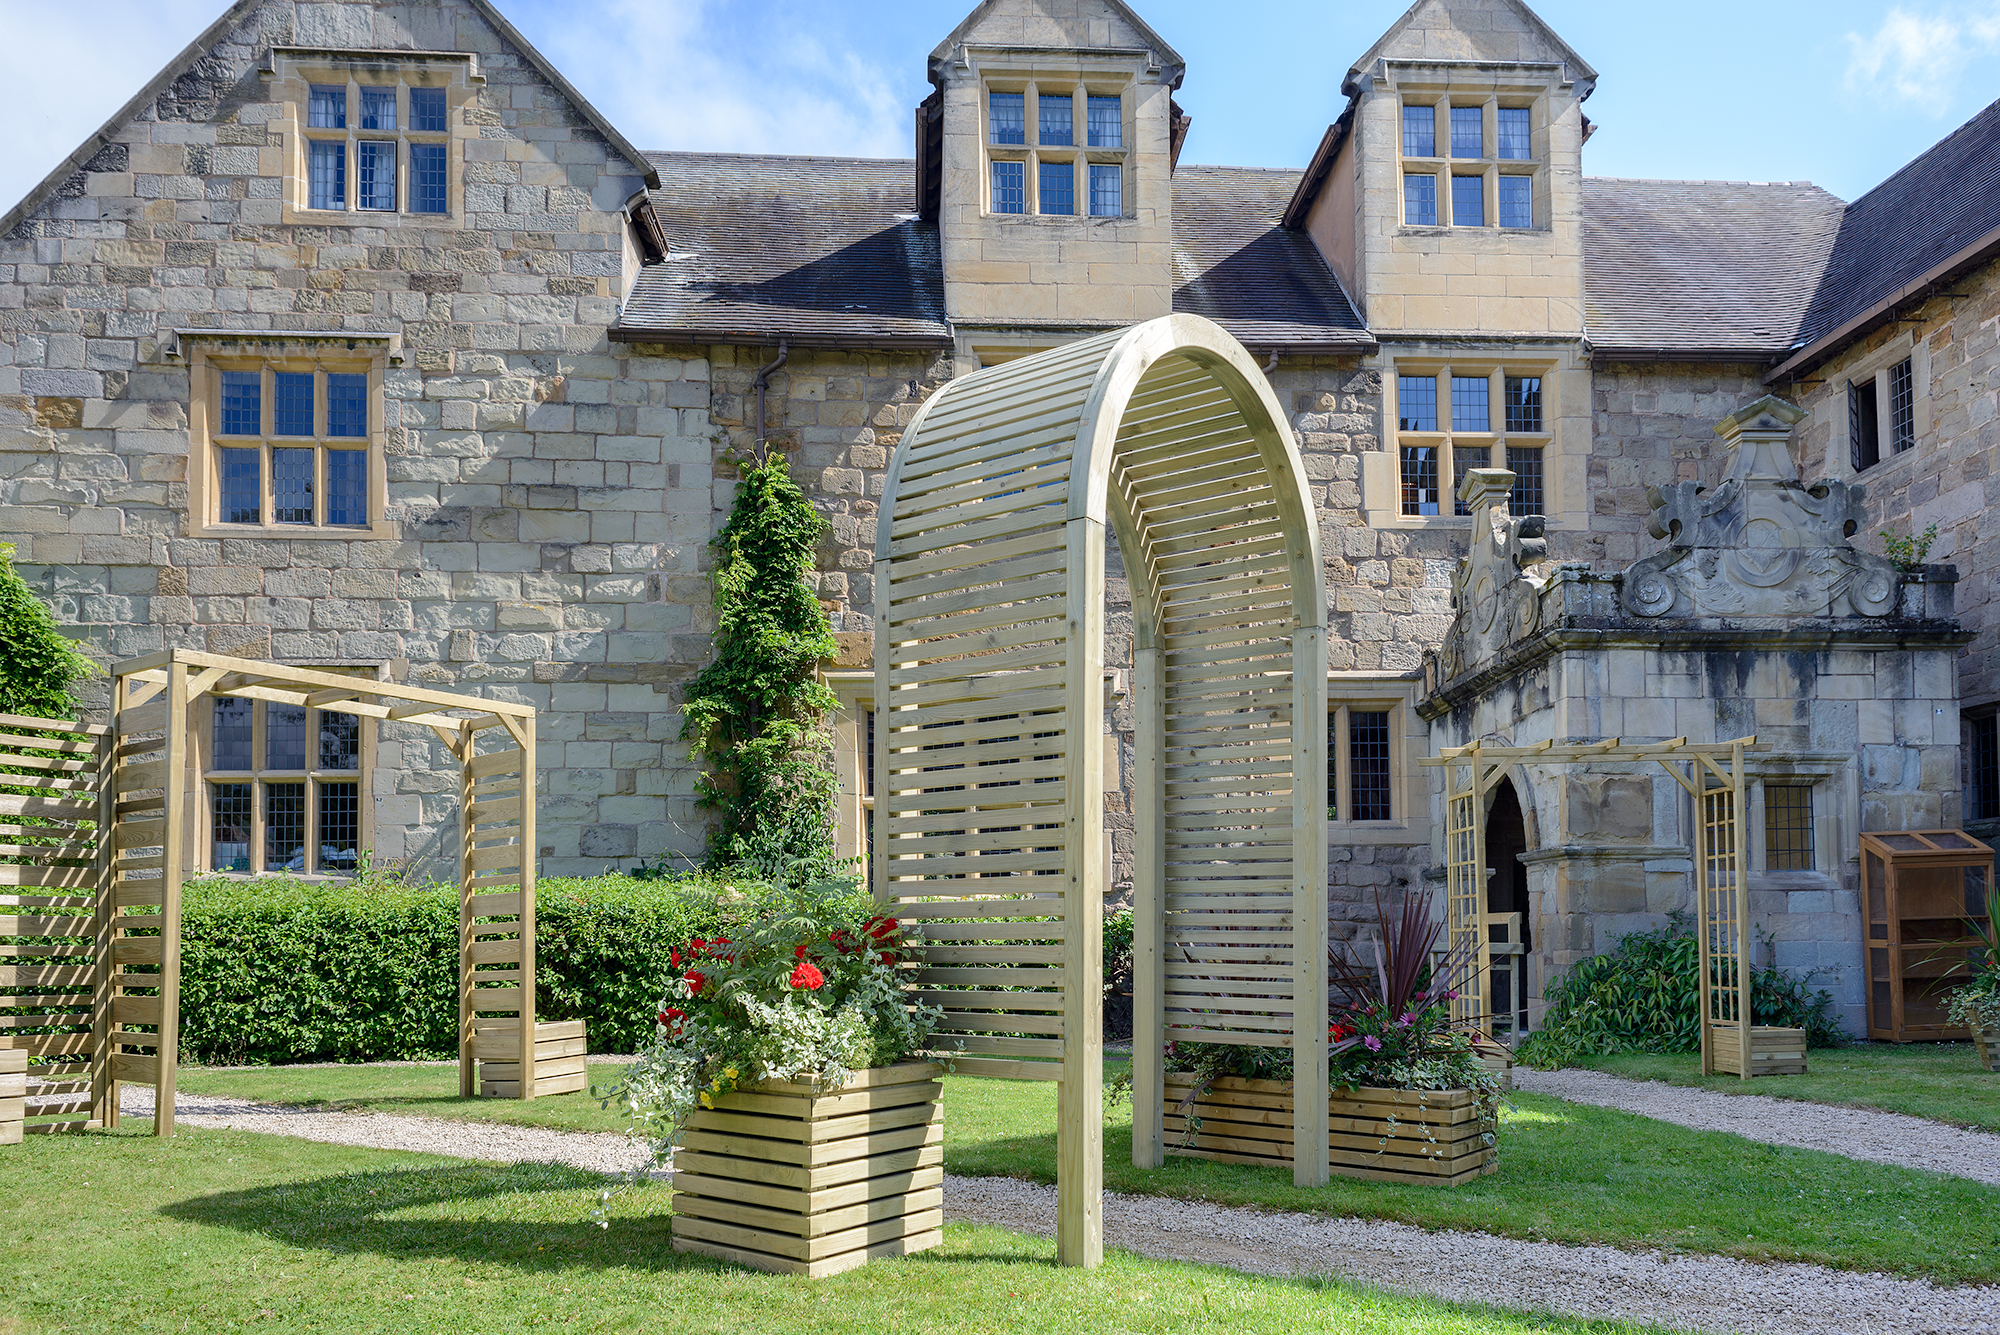 The Contemporary Garden Arch is a substantial and stylish structure. The chunky arched top, posts and slats are planed, rounded and chamfered for a modern look. Use with climbing plants along a pathway or as a standalone feature in your garden.